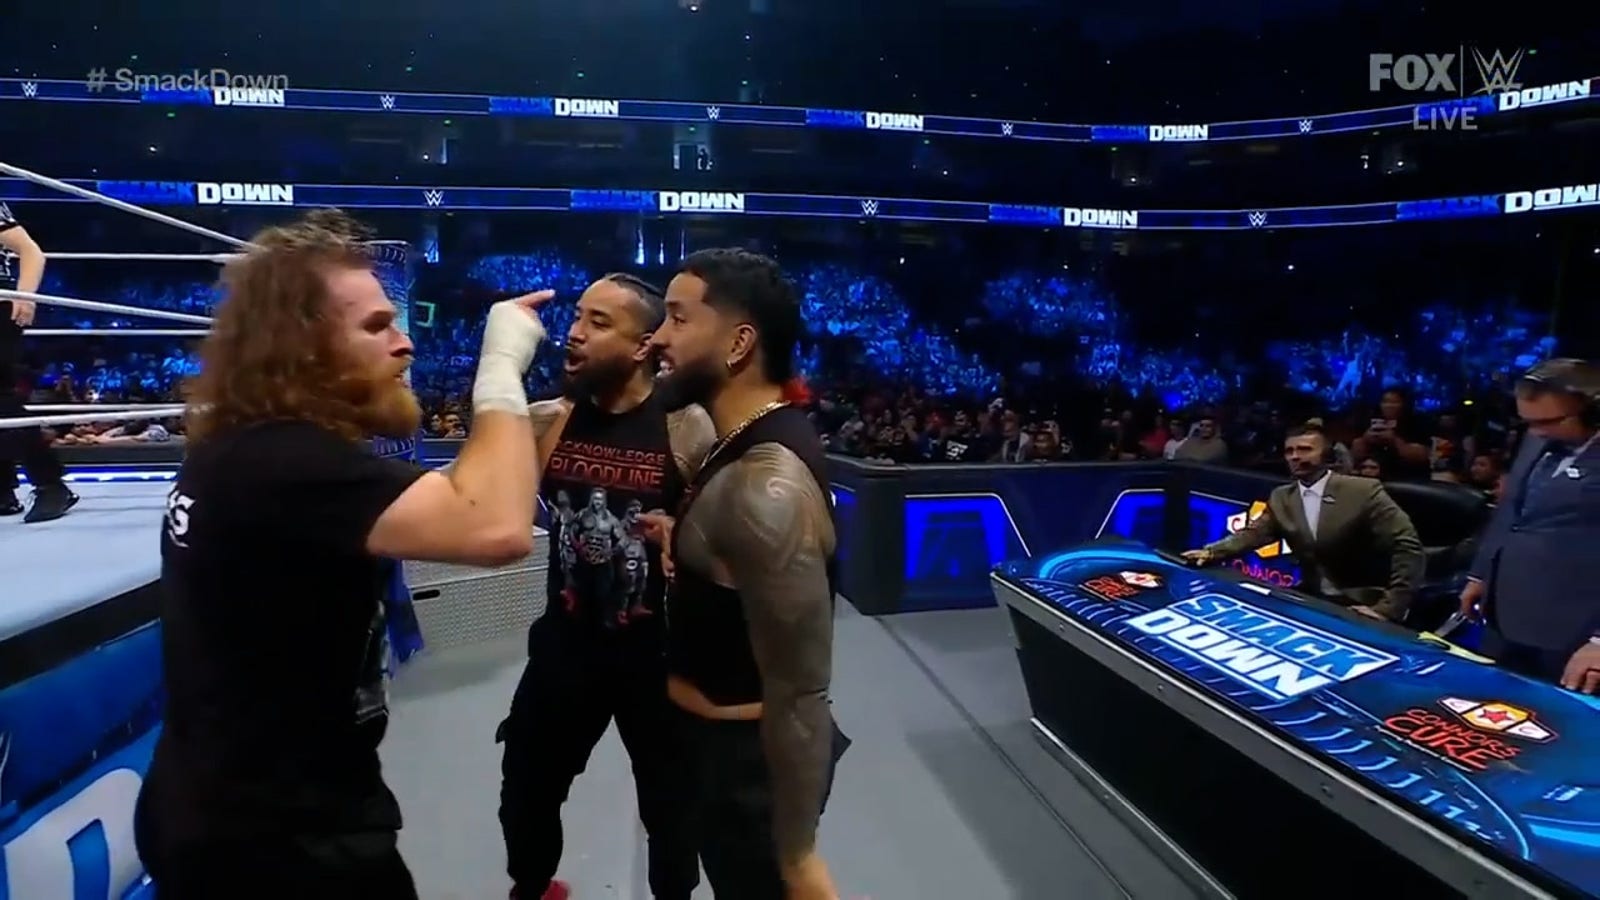 Sami Zayn gets into it with Jey Uso before falling to Ricochet on SmackDown